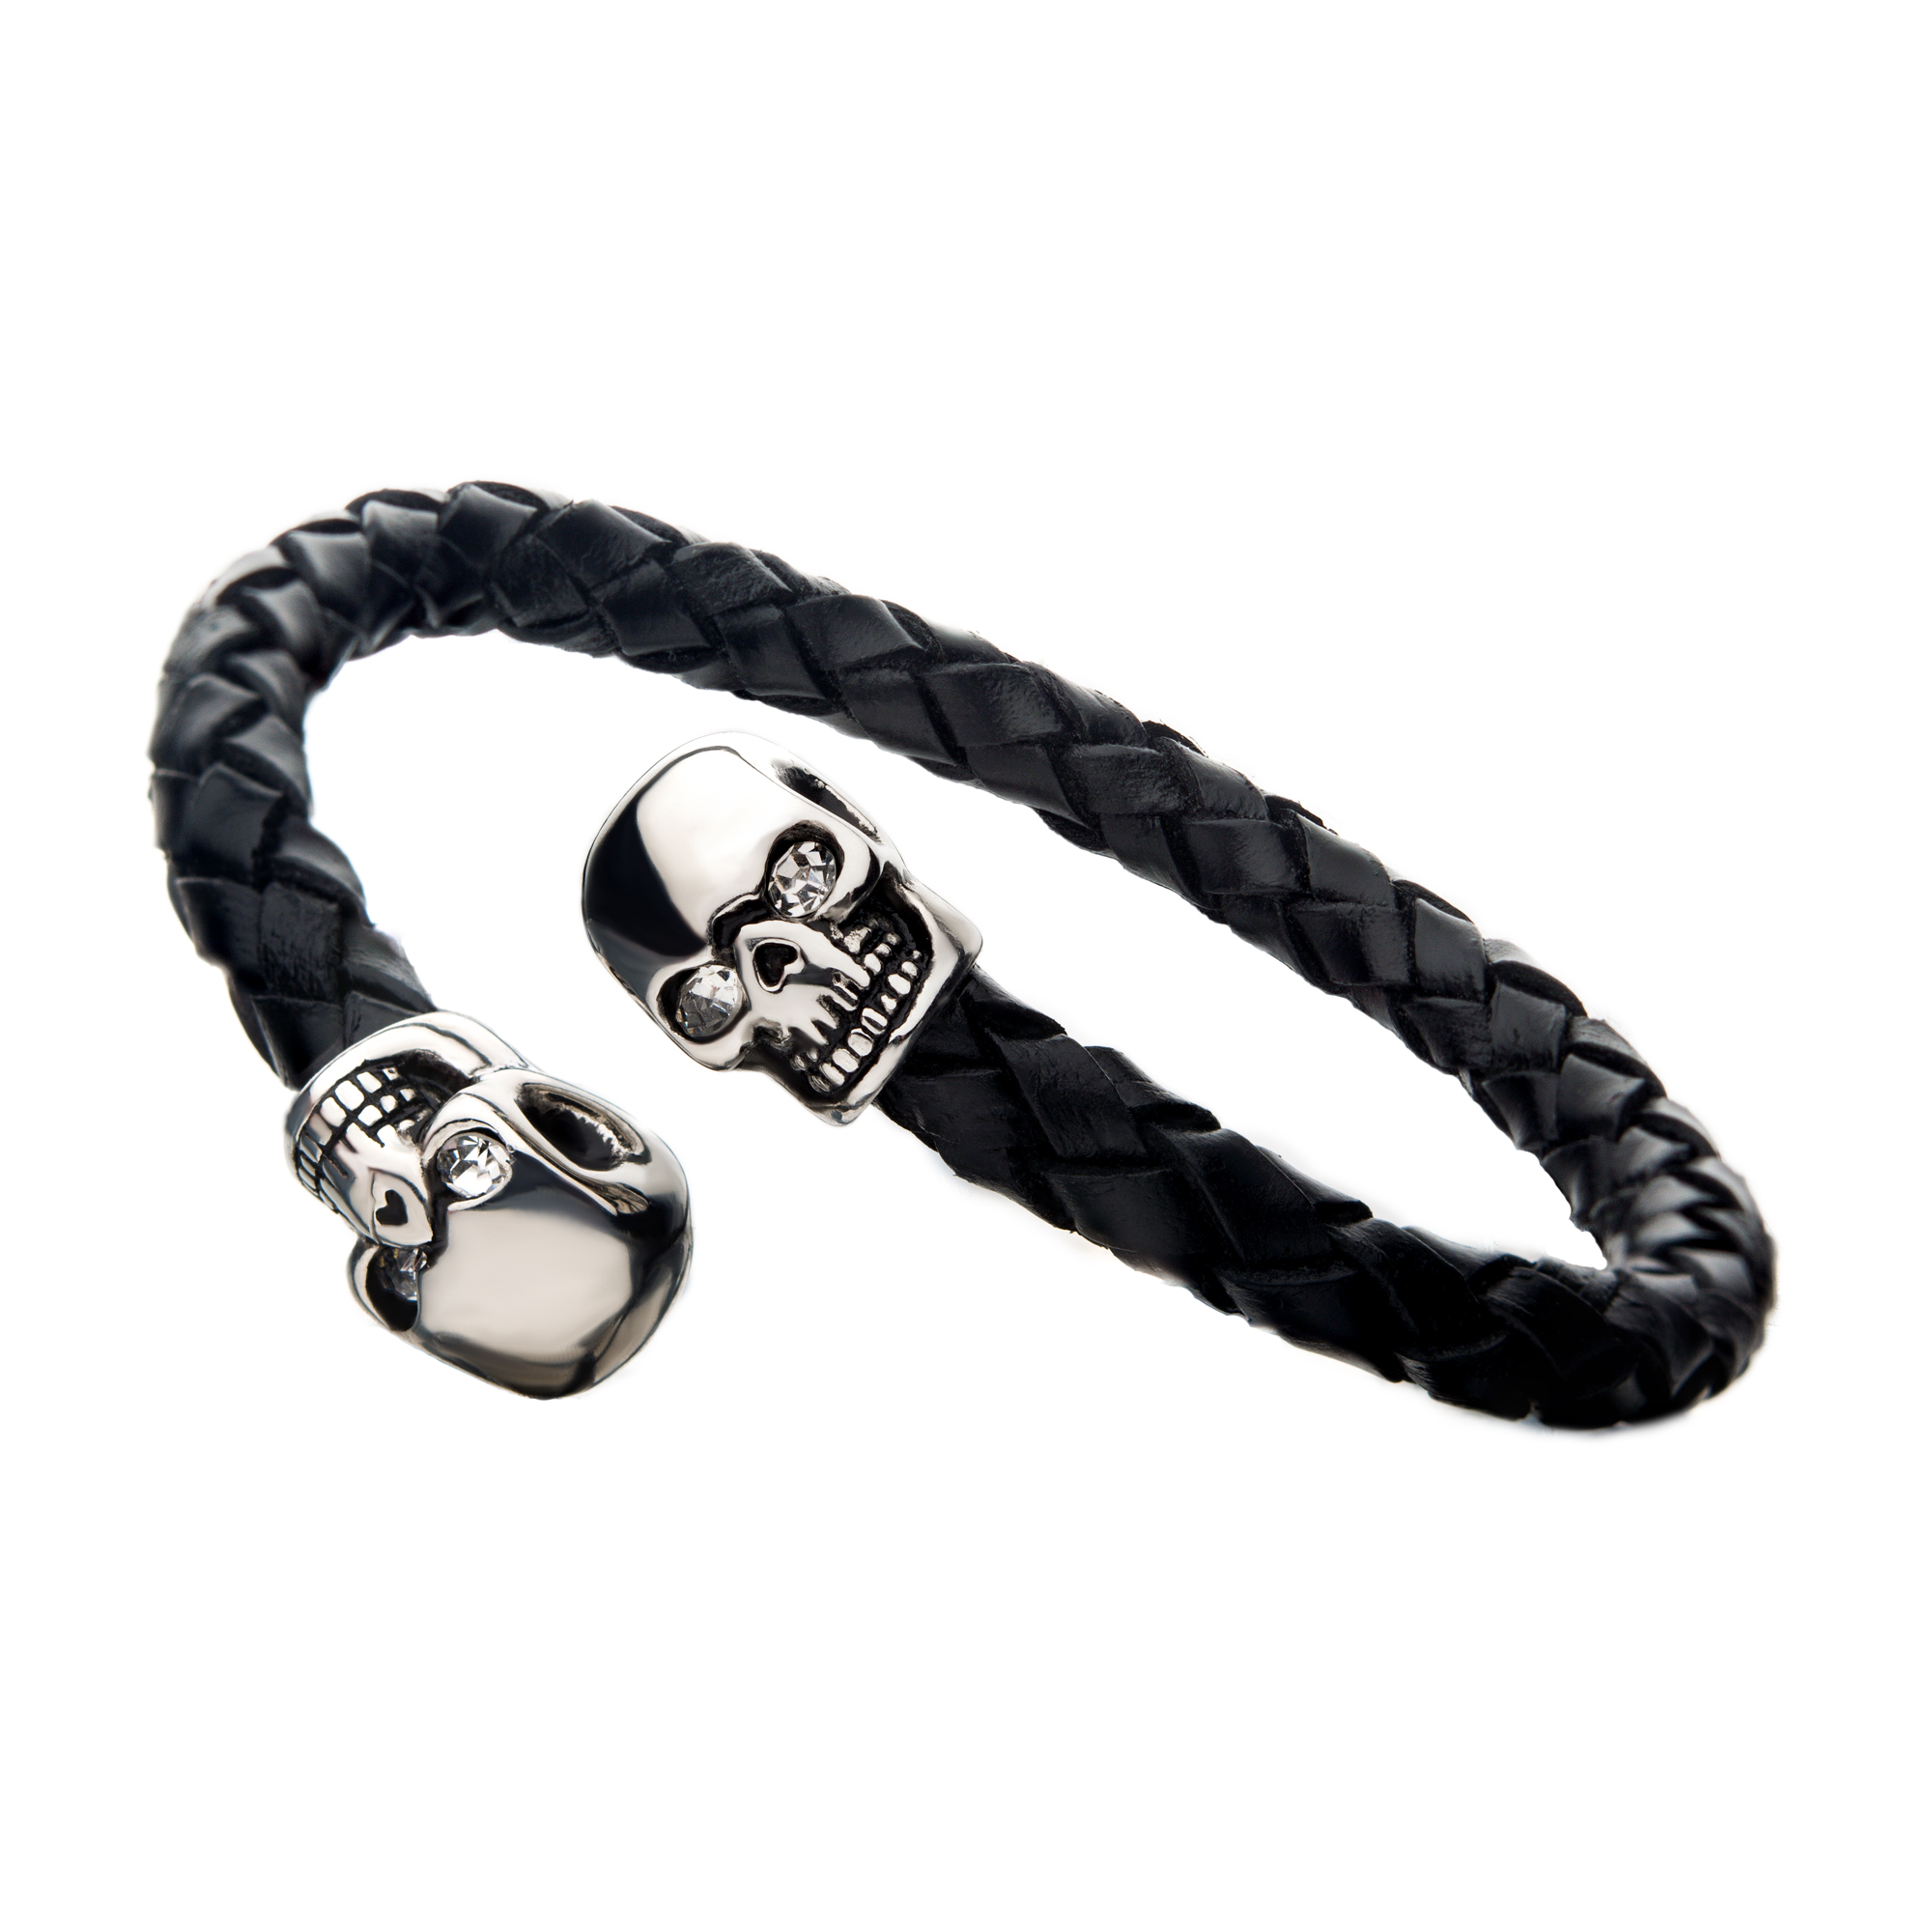 Skull Ends Cuff Leather Bracelet Image 2 Lewis Jewelers, Inc. Ansonia, CT